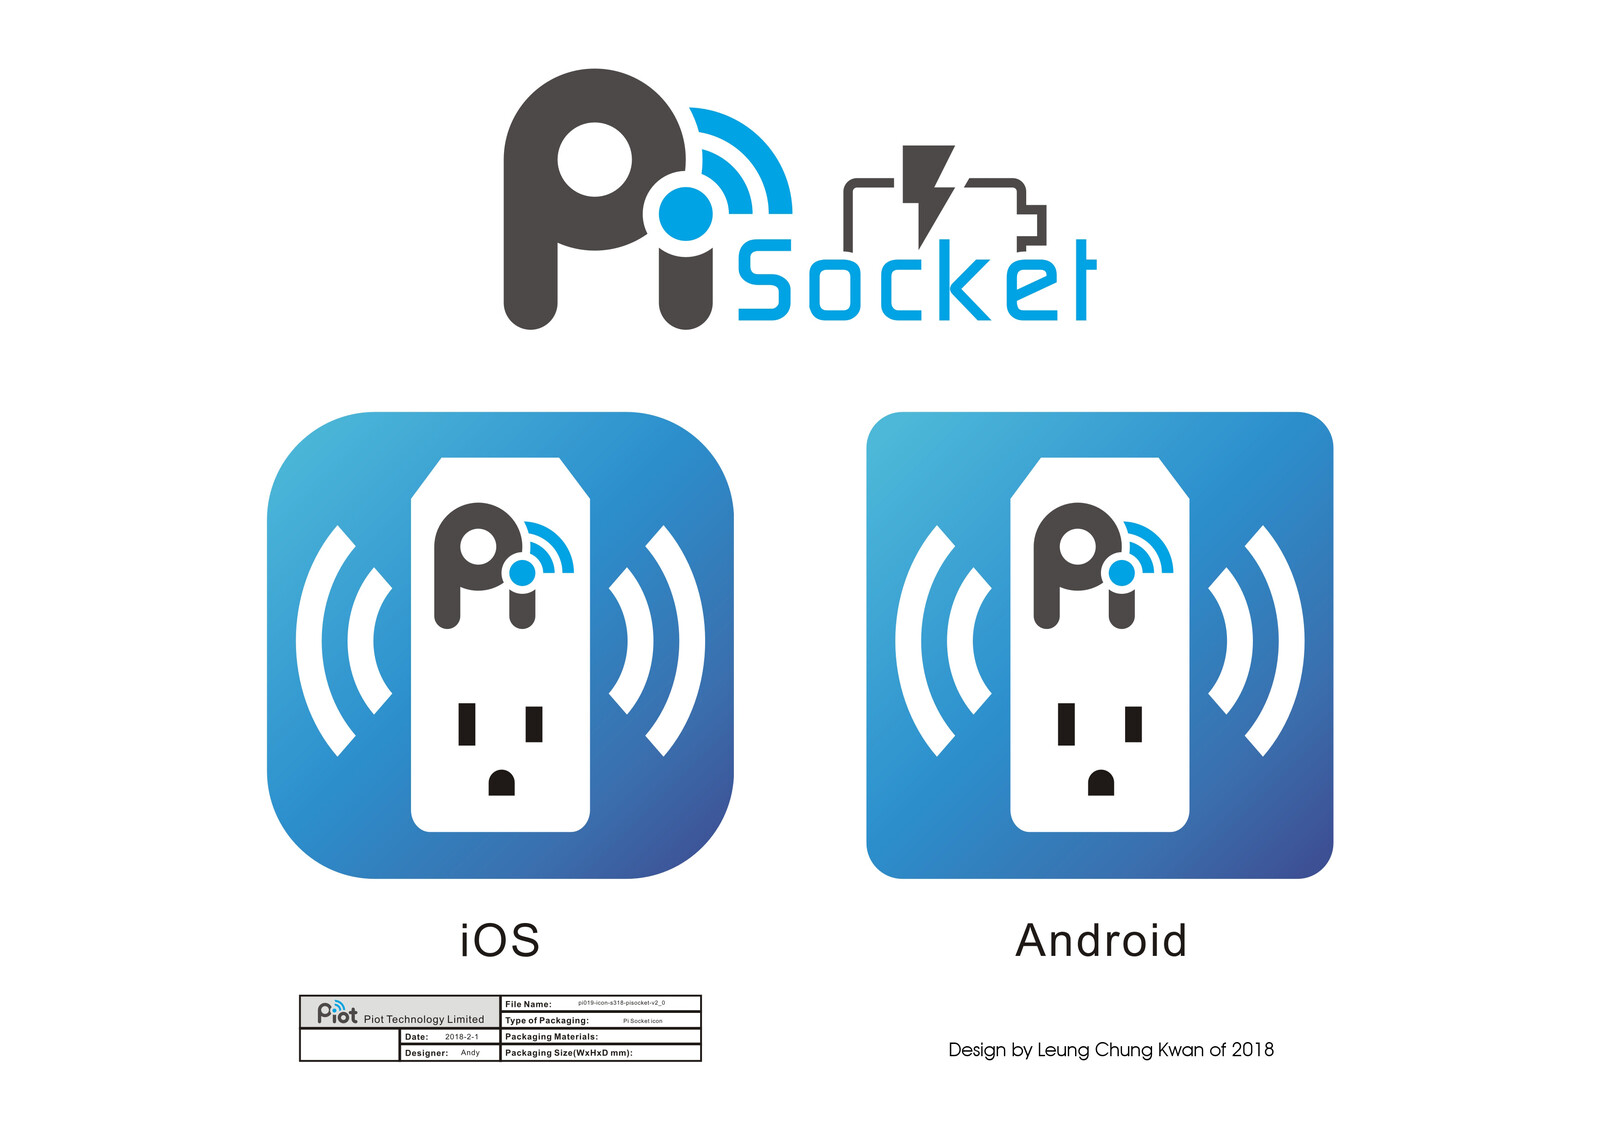 💎 App Icon | Design by Leung Chung Kwan on 2018 💎
App Name︰Pisocket | Client︰Piot Technology Limited